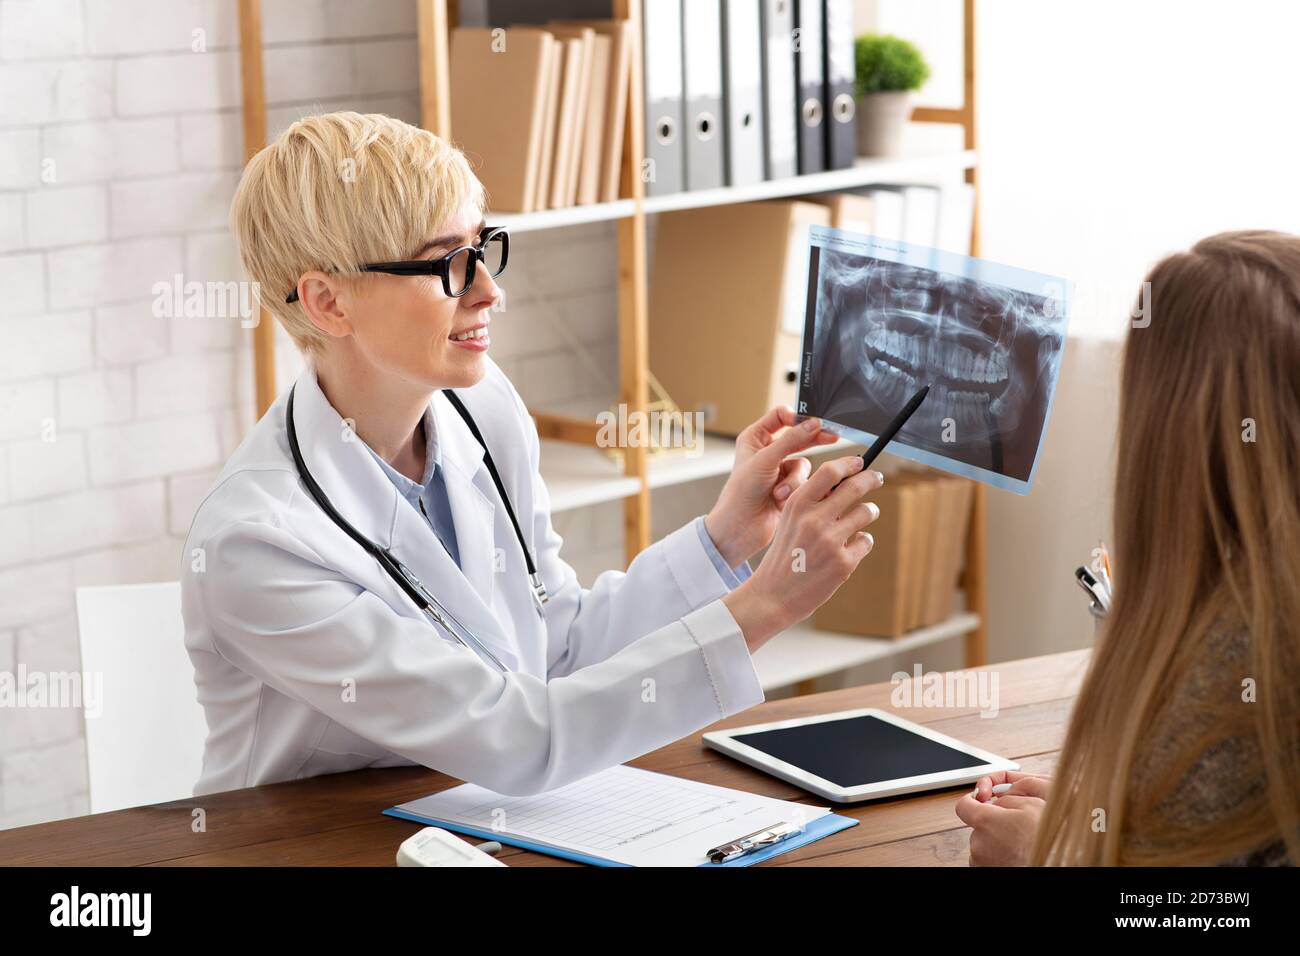 Adult lady doctor in white coat and glasses shows x-ray of patient jaw and teeth and diagnoses, sitting at table Stock Photo